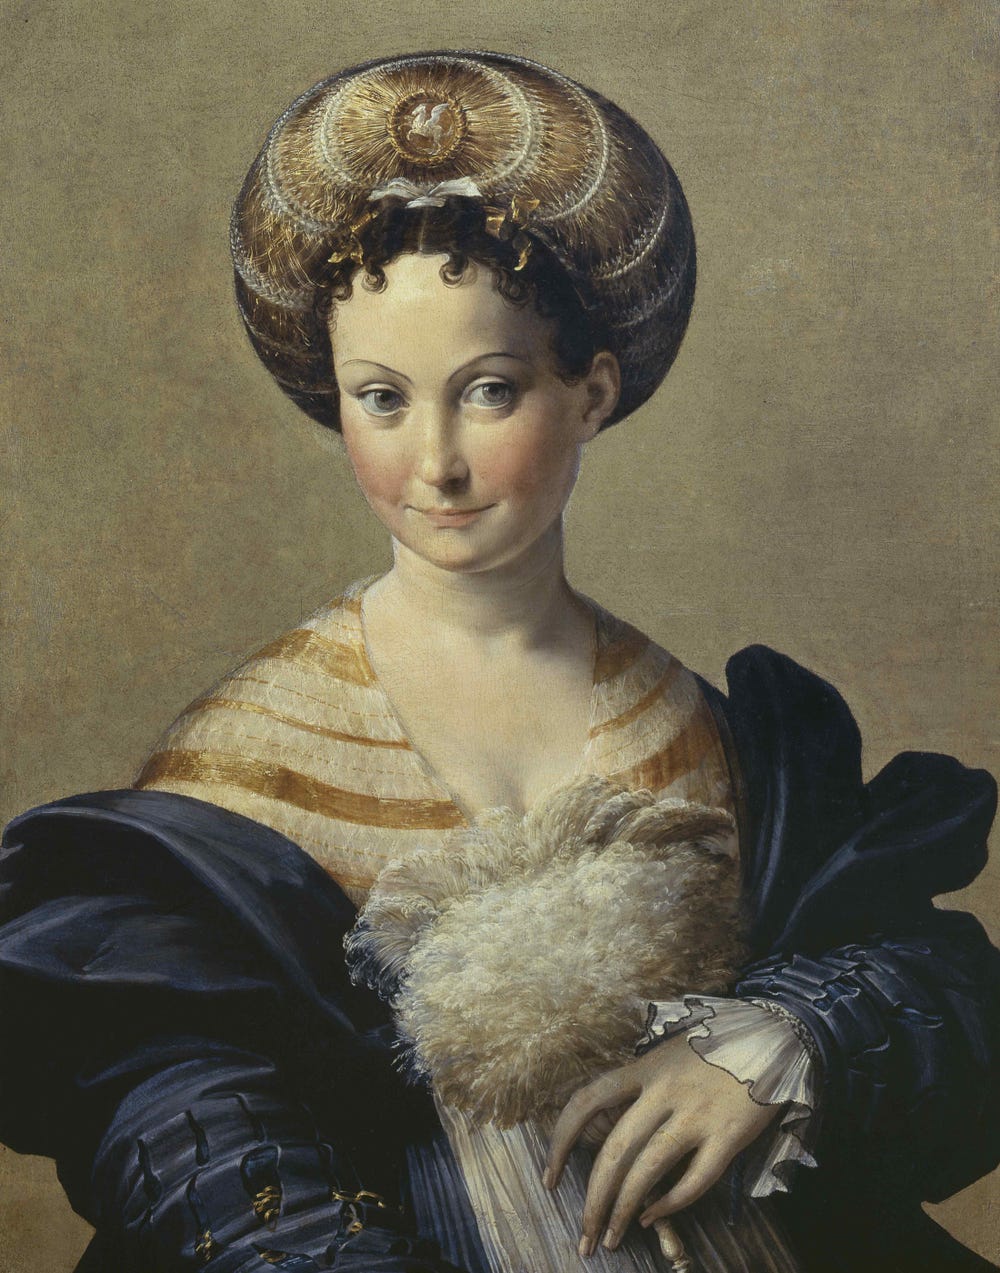 Painting portrait of woman wearing blue and yellow finery and detailed woven hat.